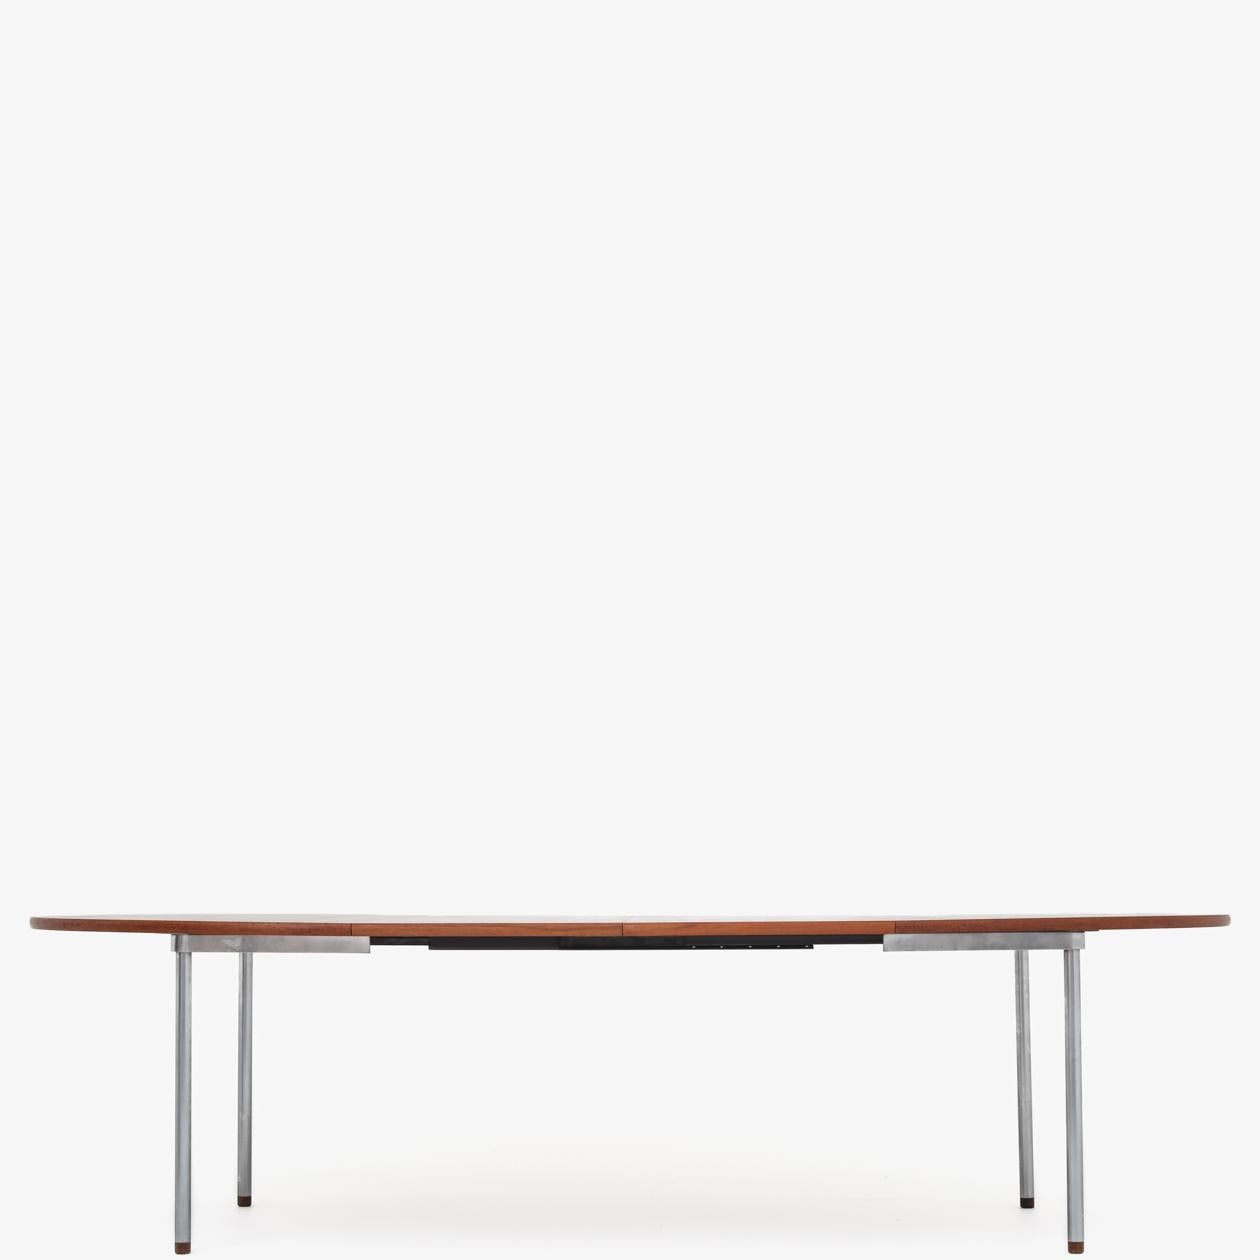 JH 756 - Rare dining table with top, two additional plates and shoes in teak with steel legs. Hans J. Wegner / Johannes Hansen.